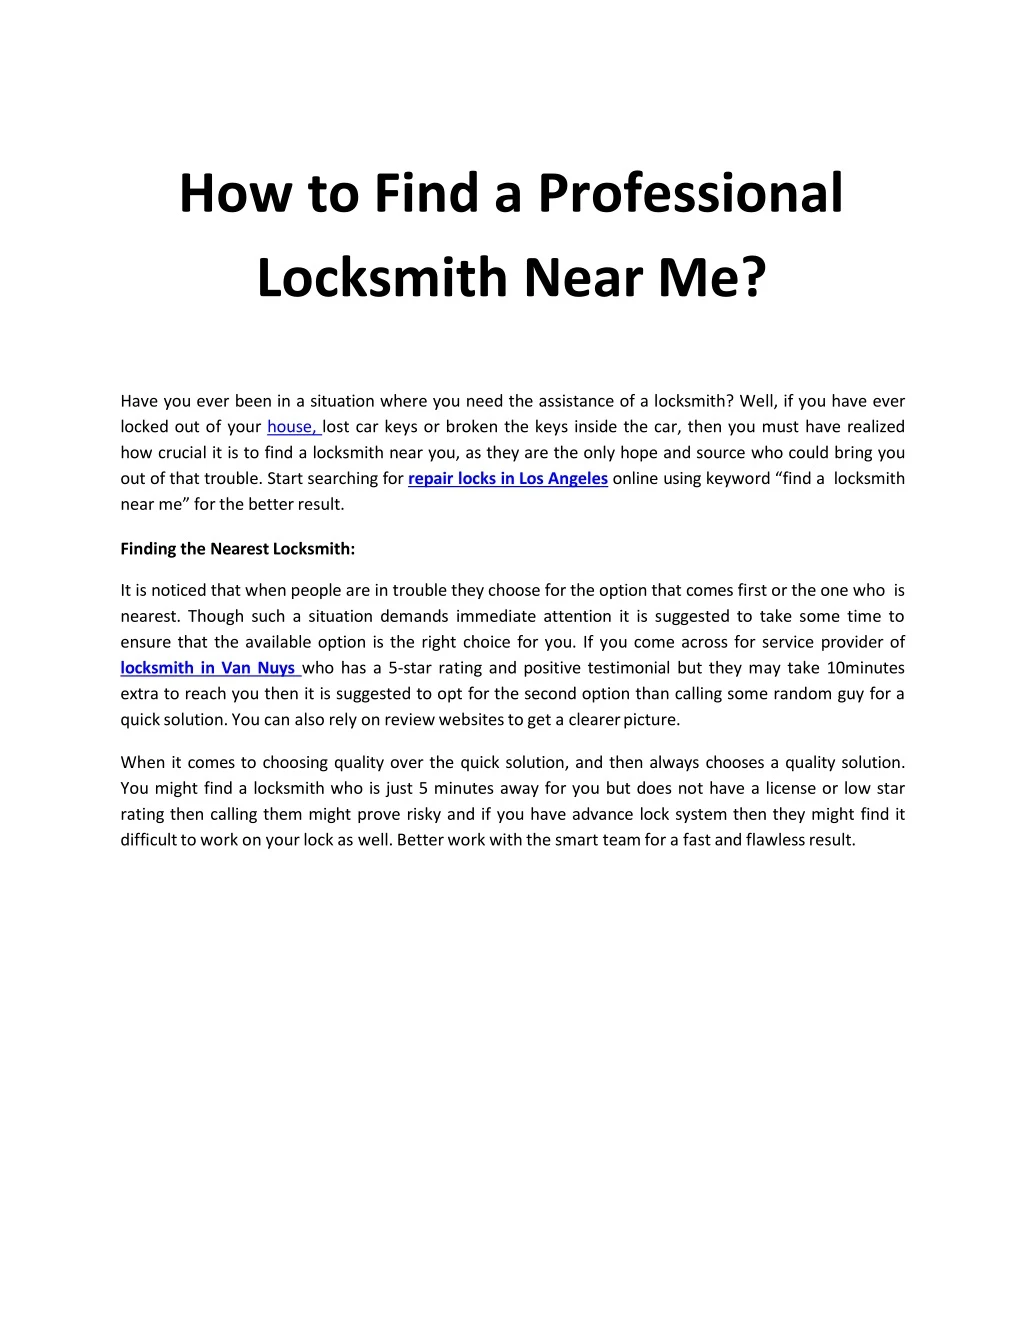 how to find a professional locksmith near me